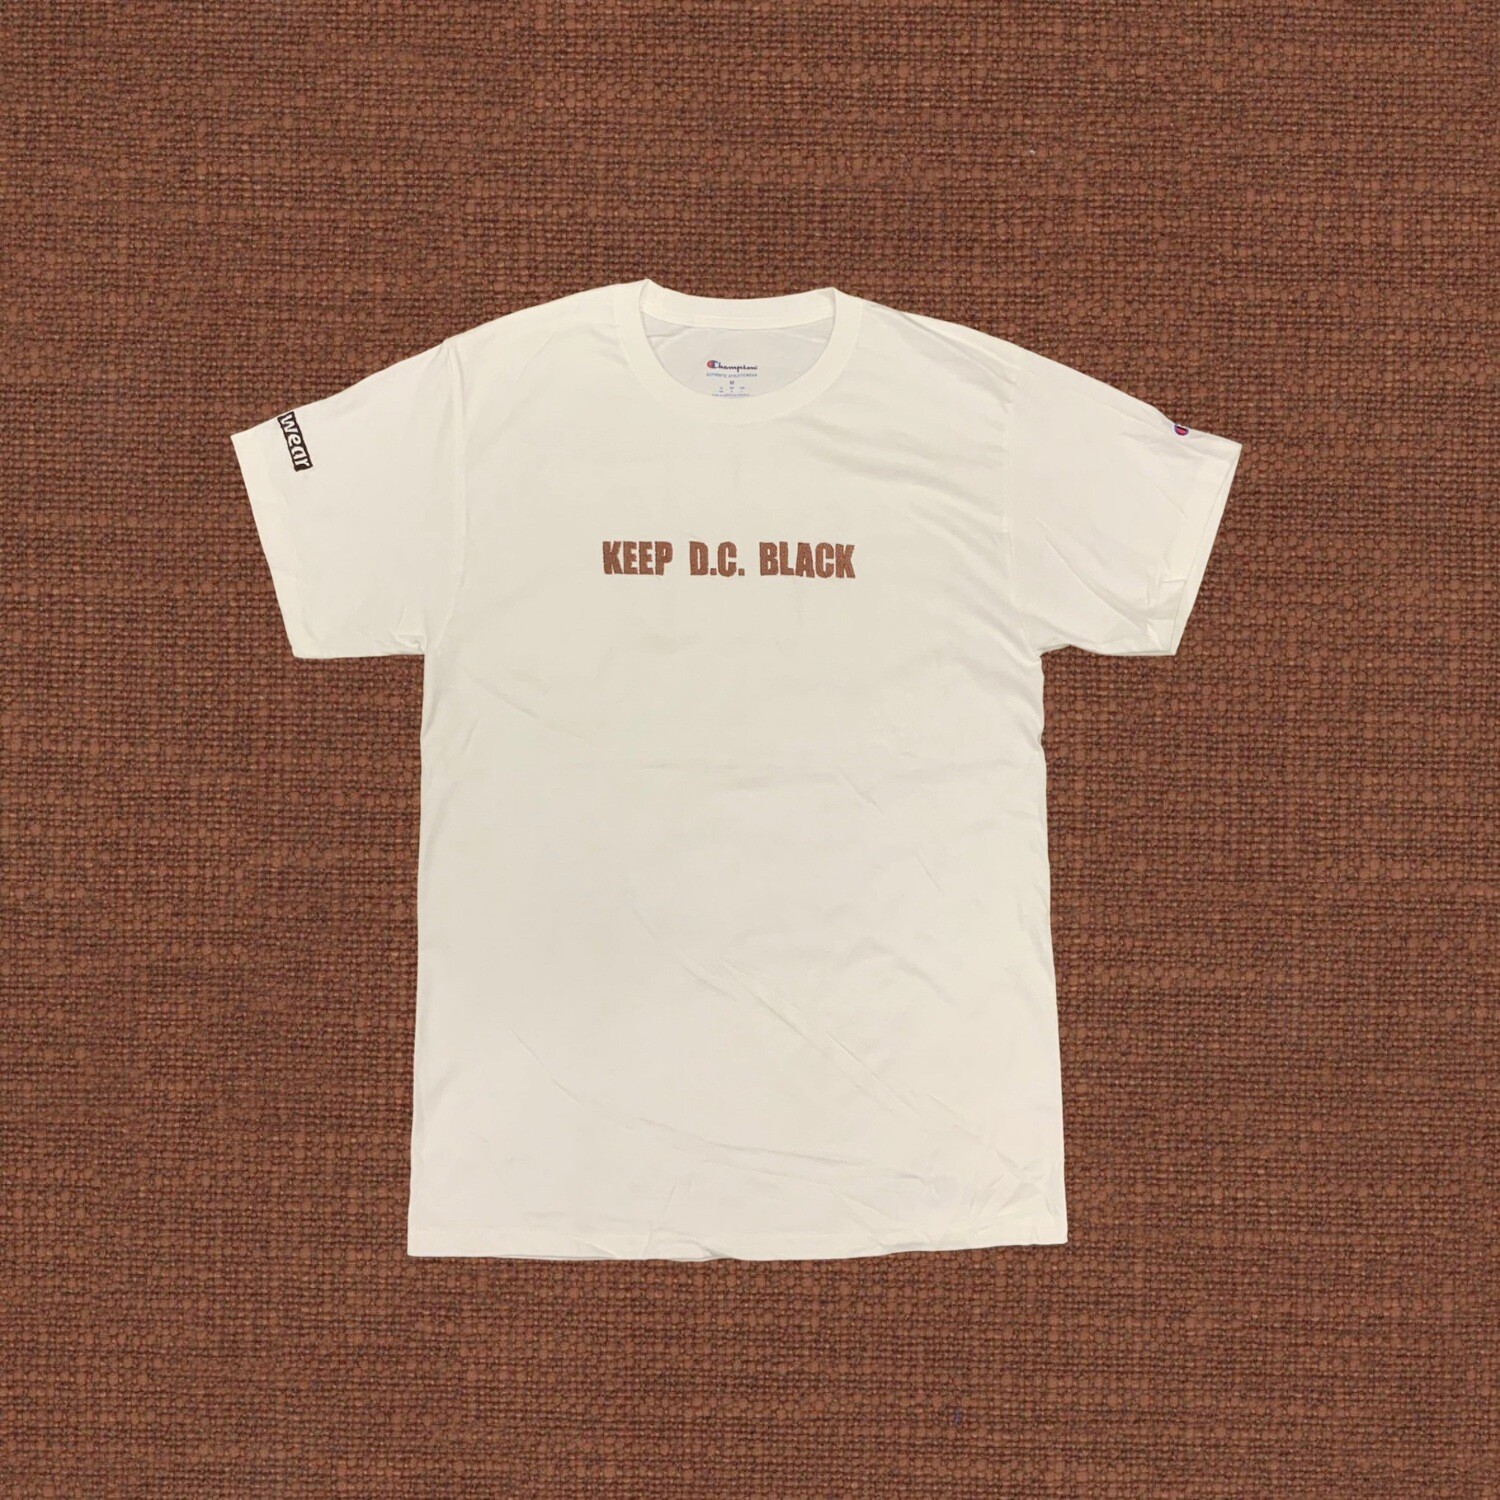 Keep D.C. Black T-Shirt, Color: White/Chocolate Brown, Size: S